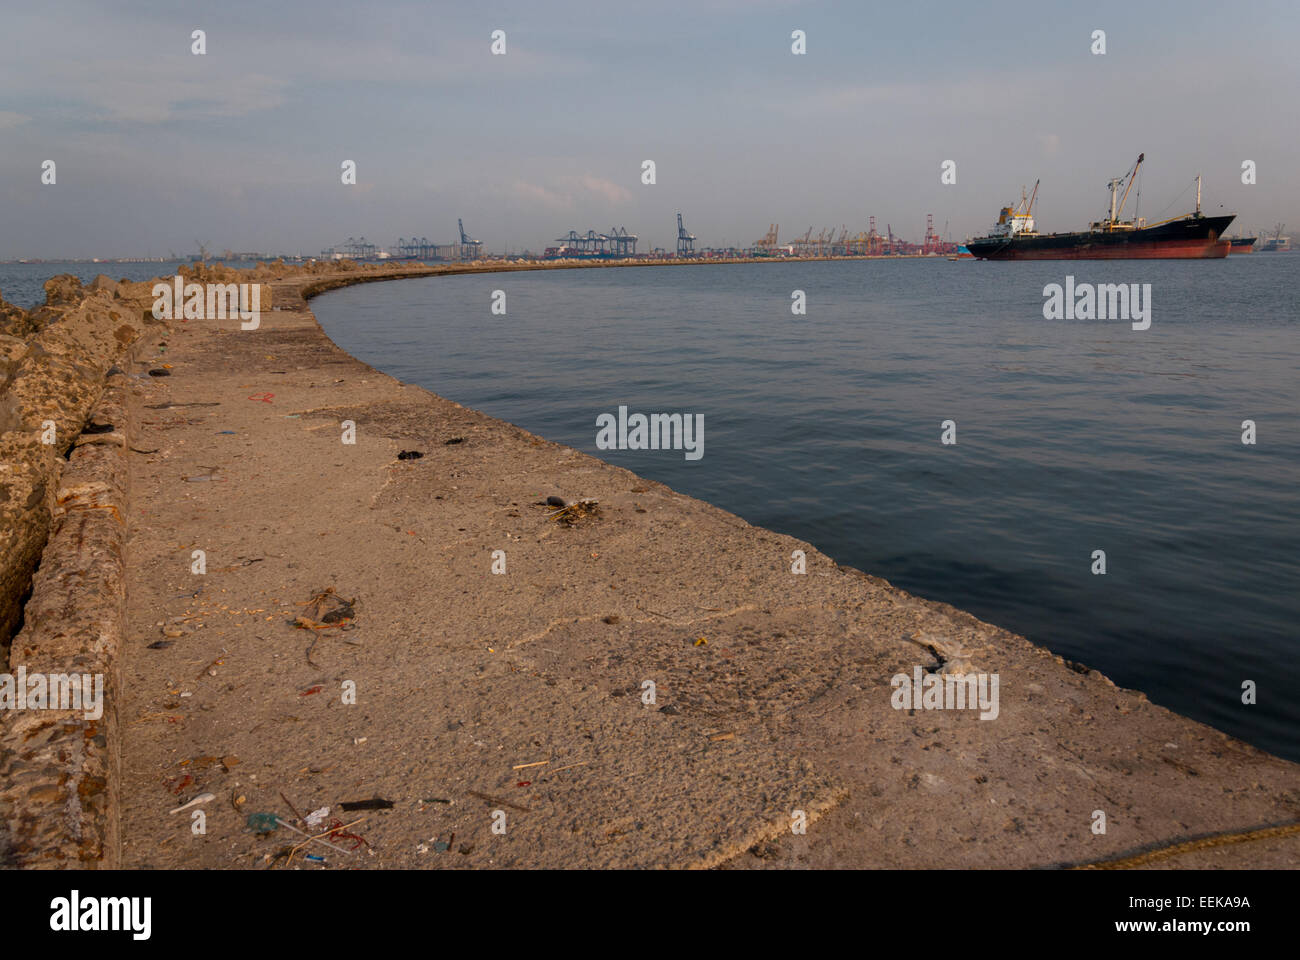 Breakwater structure and a concrete platform on Port of Jakarta's turning basin, with Amanna Gappa general cargo ship can be seen on top right corner. Stock Photo